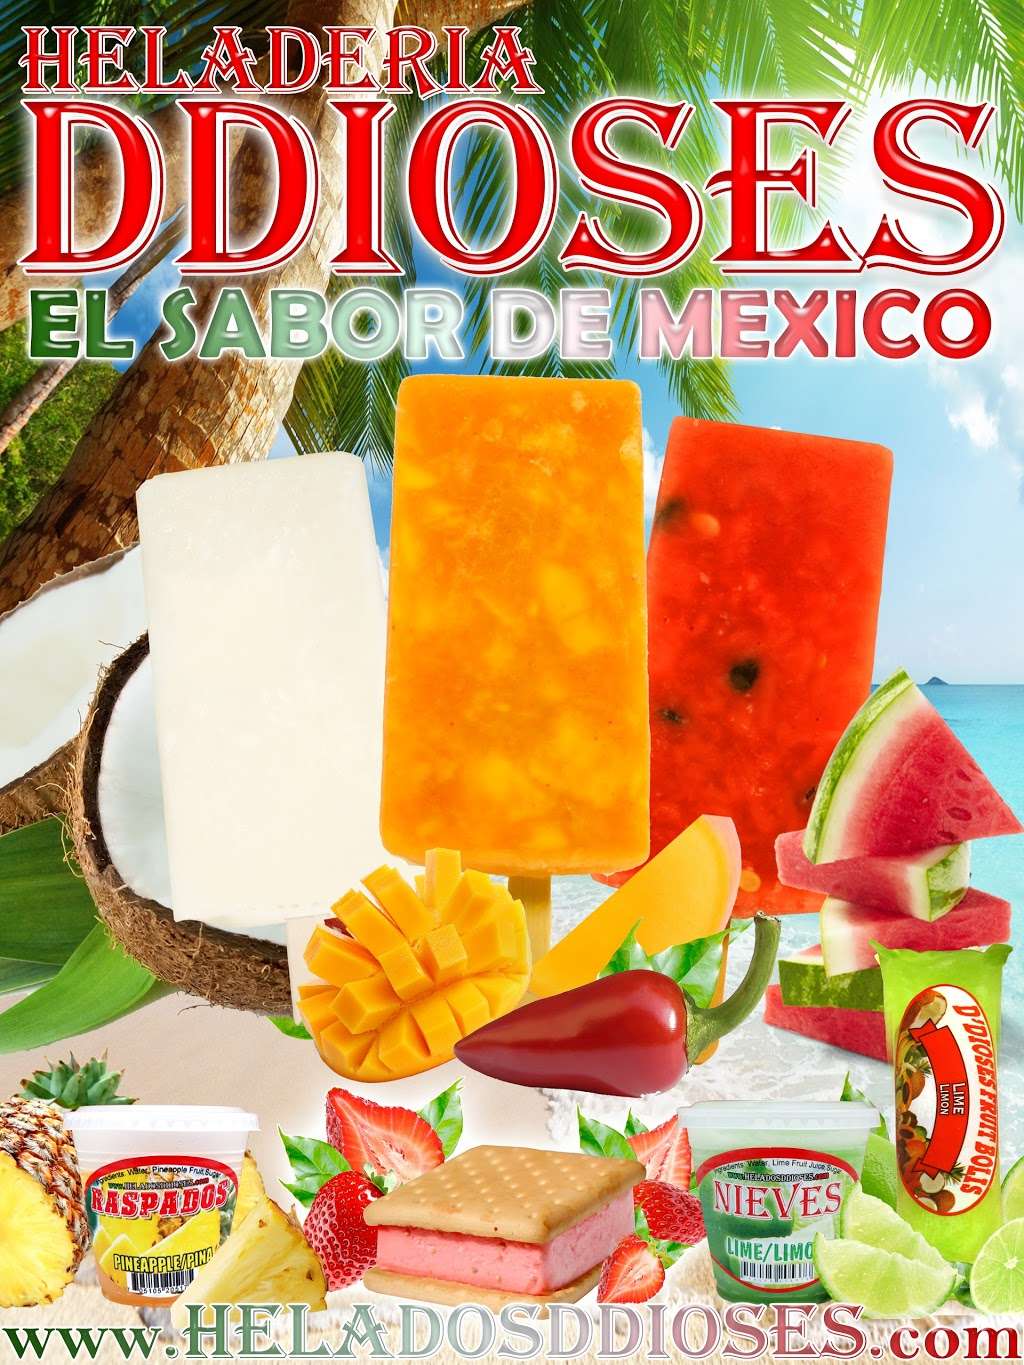 DDioses Fruit Pops | 287 Marshall St, Paterson, NJ 07503 | Phone: (973) 279-7900